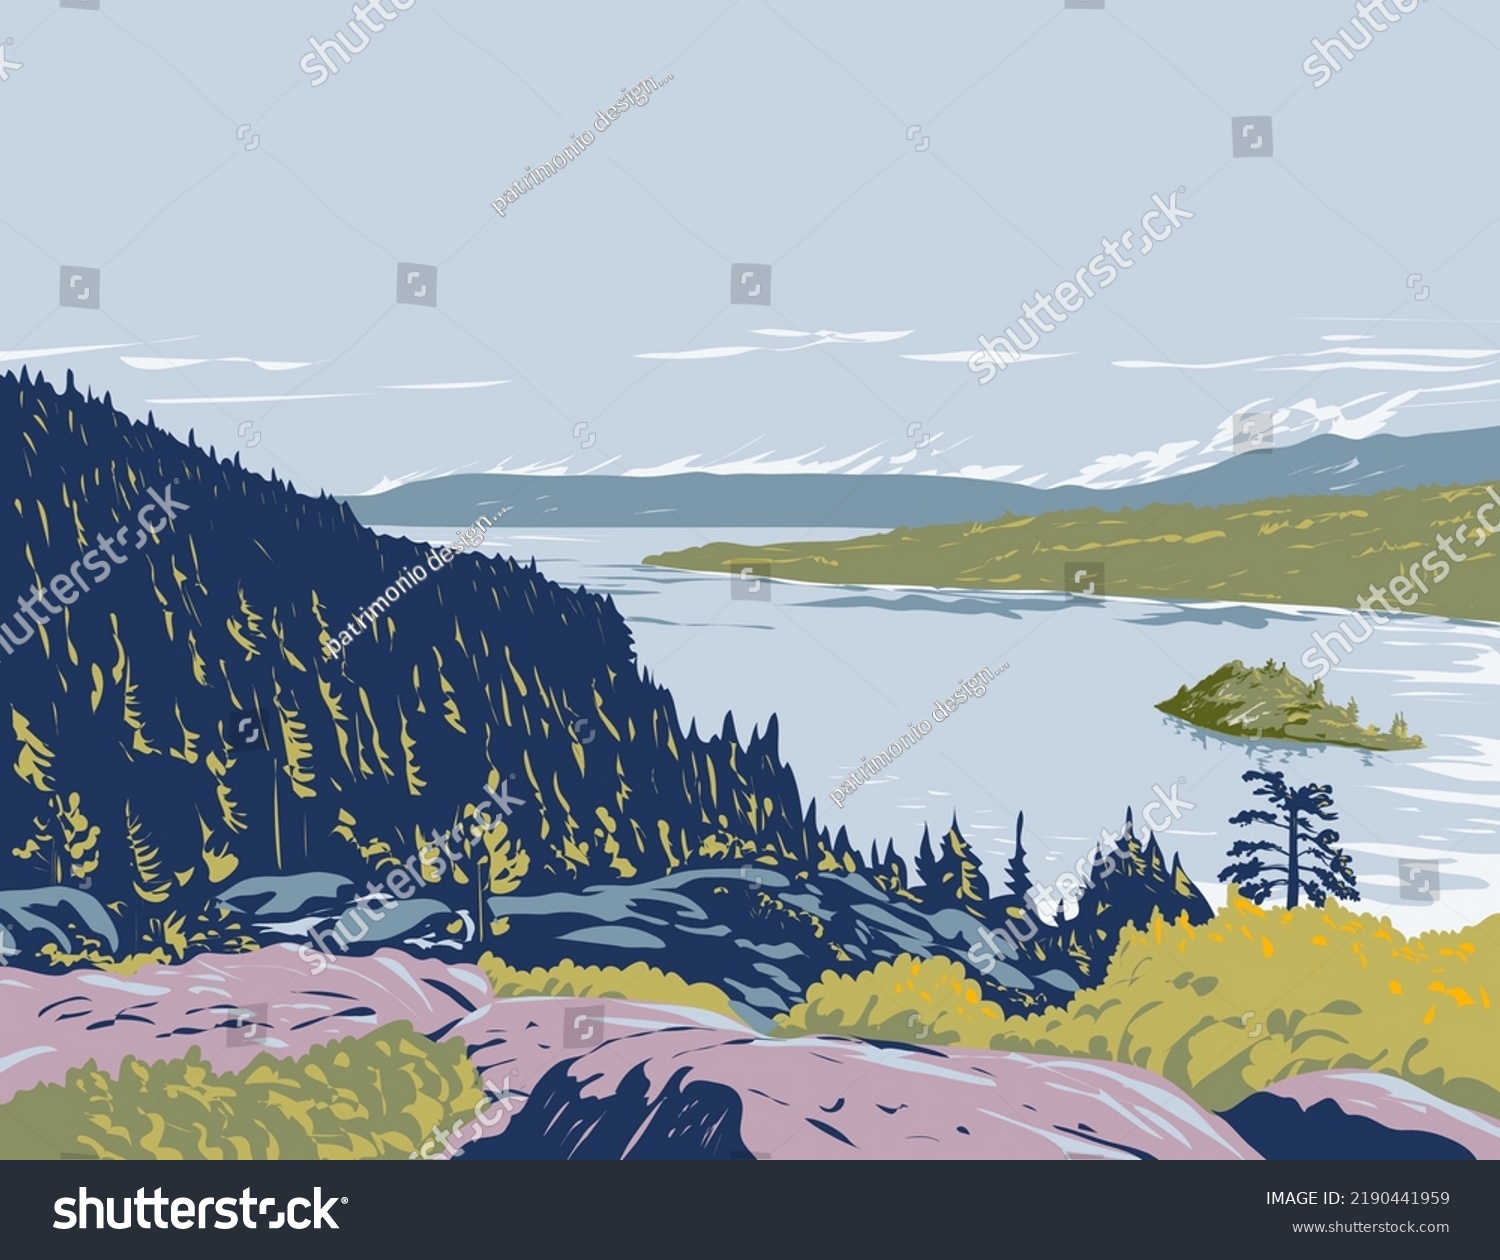 SVG of WPA poster art of Fannette Island in Lake Tahoe within Emerald Bay State Park in California, United States, USA done in works project administration style or federal art project style. svg